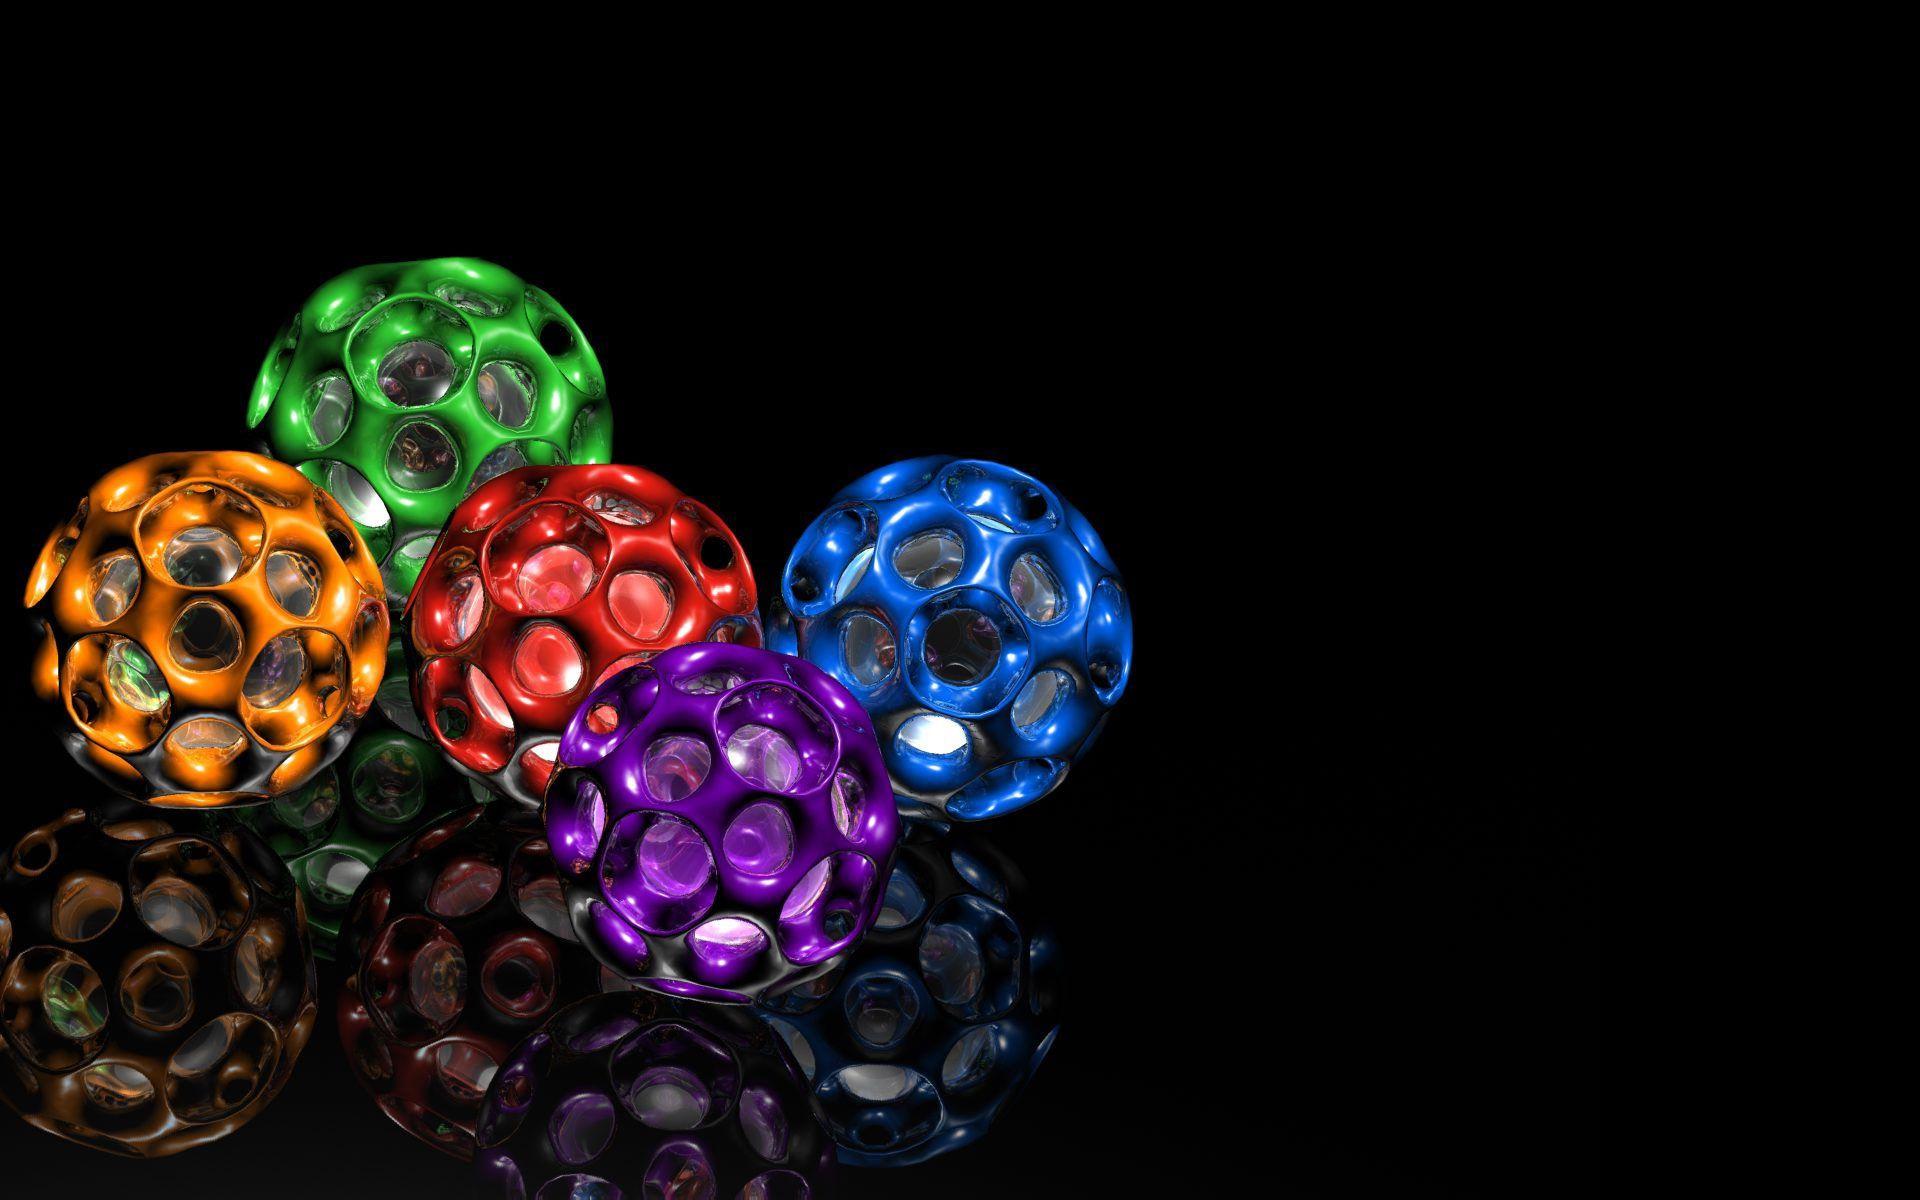 Colorful shine ball in black 3D image HD Wallpaper Free